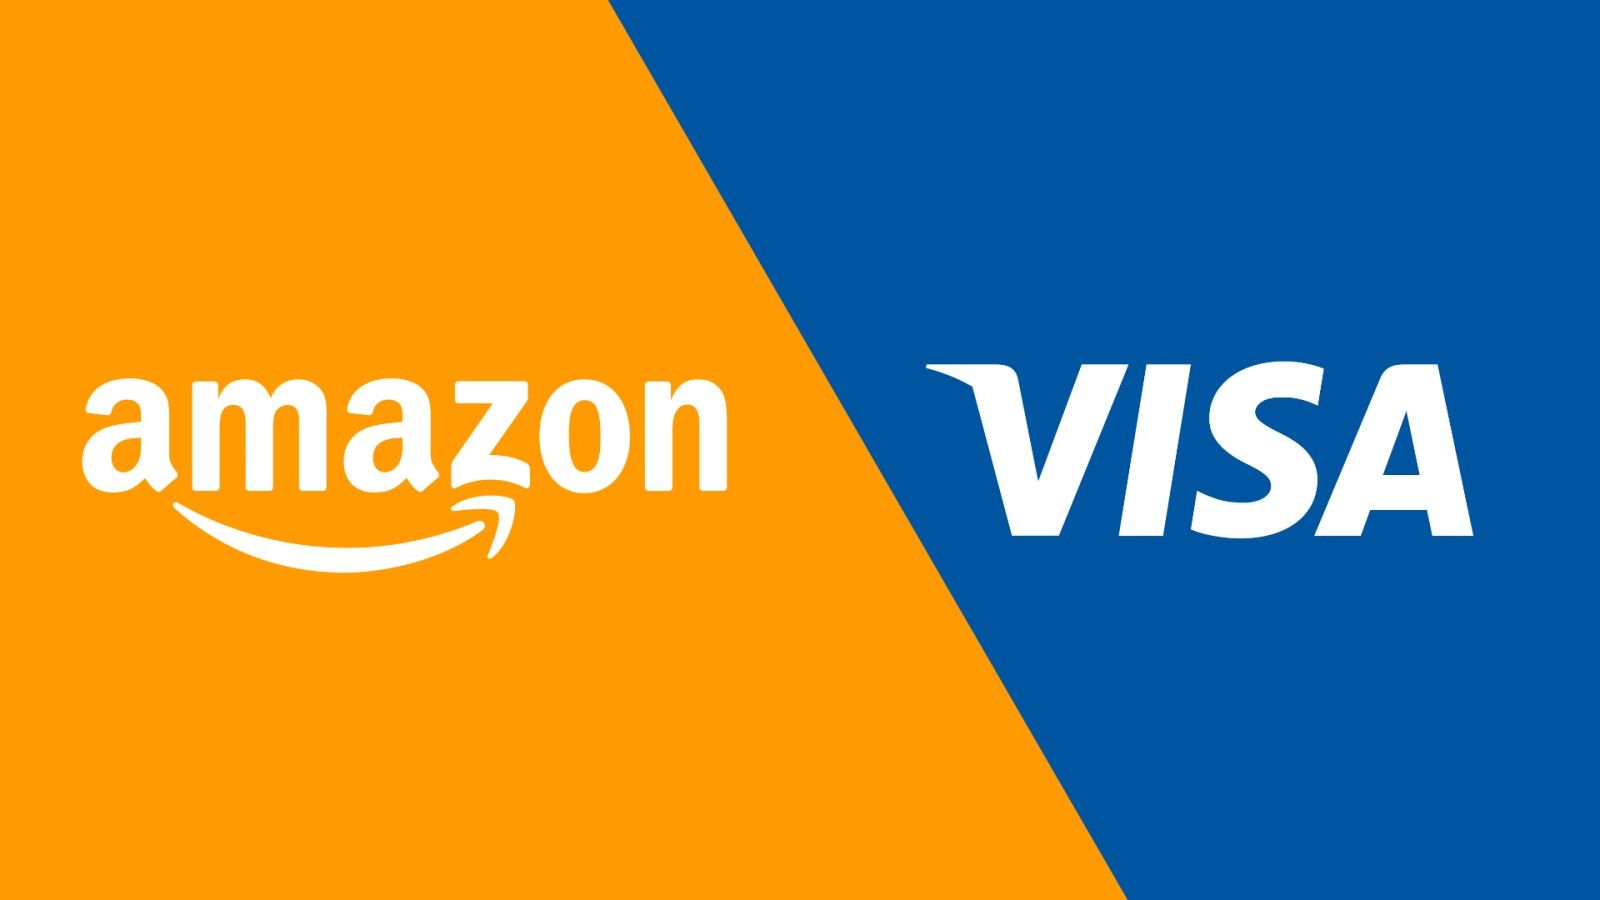 Amazon and Visa deal